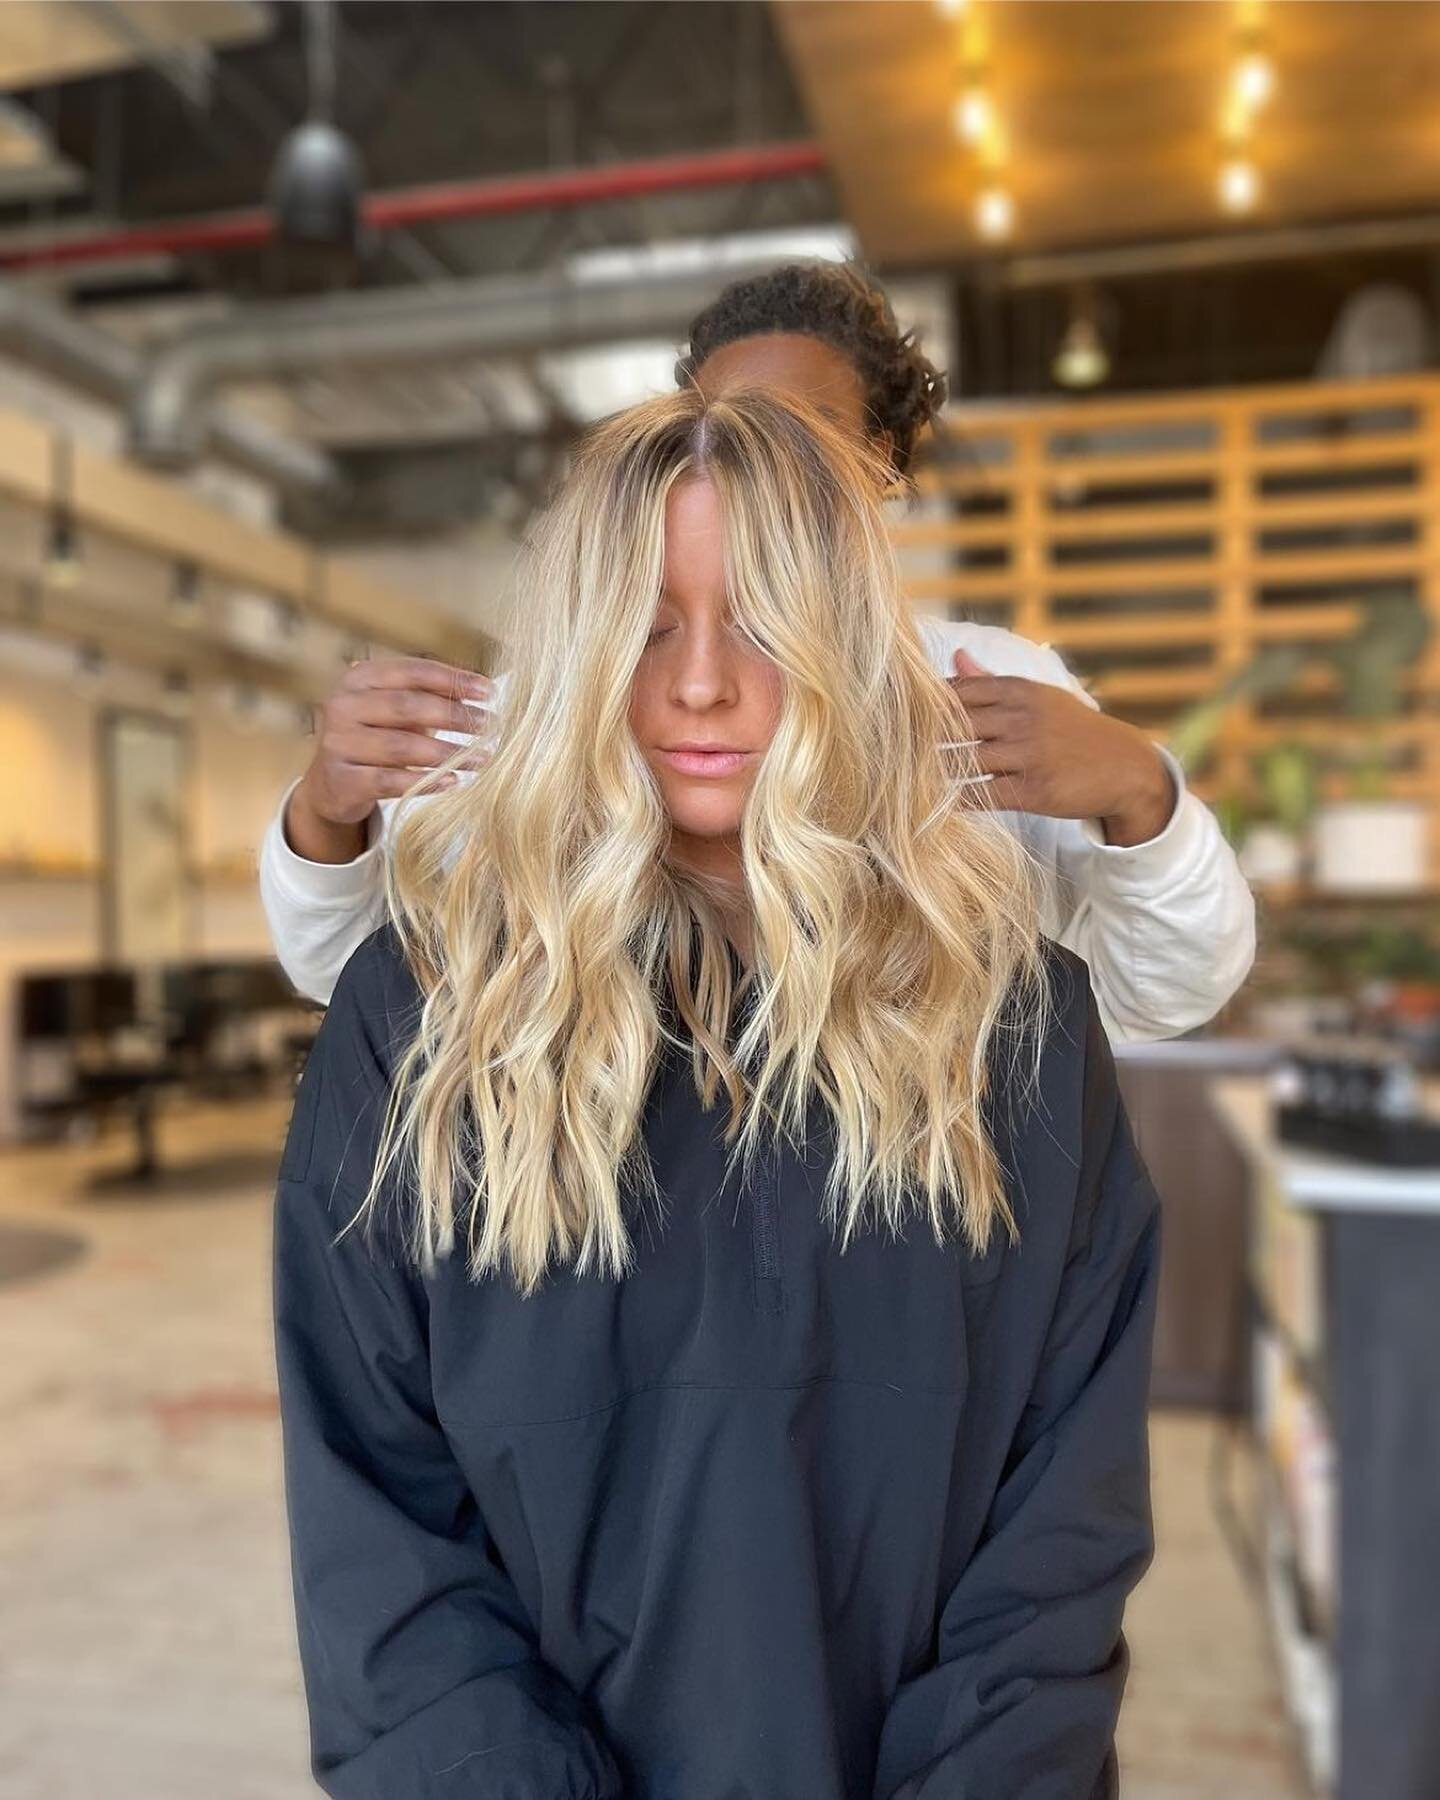 Repost from @masterofthecraft_
&bull;
NOT the average BLONDE 
.
.
#atlbalayage #atlhairstylist
#atlhair #atlhairsalons 
#atlhairsalon&nbsp;&nbsp;#atlantacolorspecialist 
#atlhaircolorist
#atlhairstyles
#atlantahairstylist
#atlantahairsalon #atlantaha